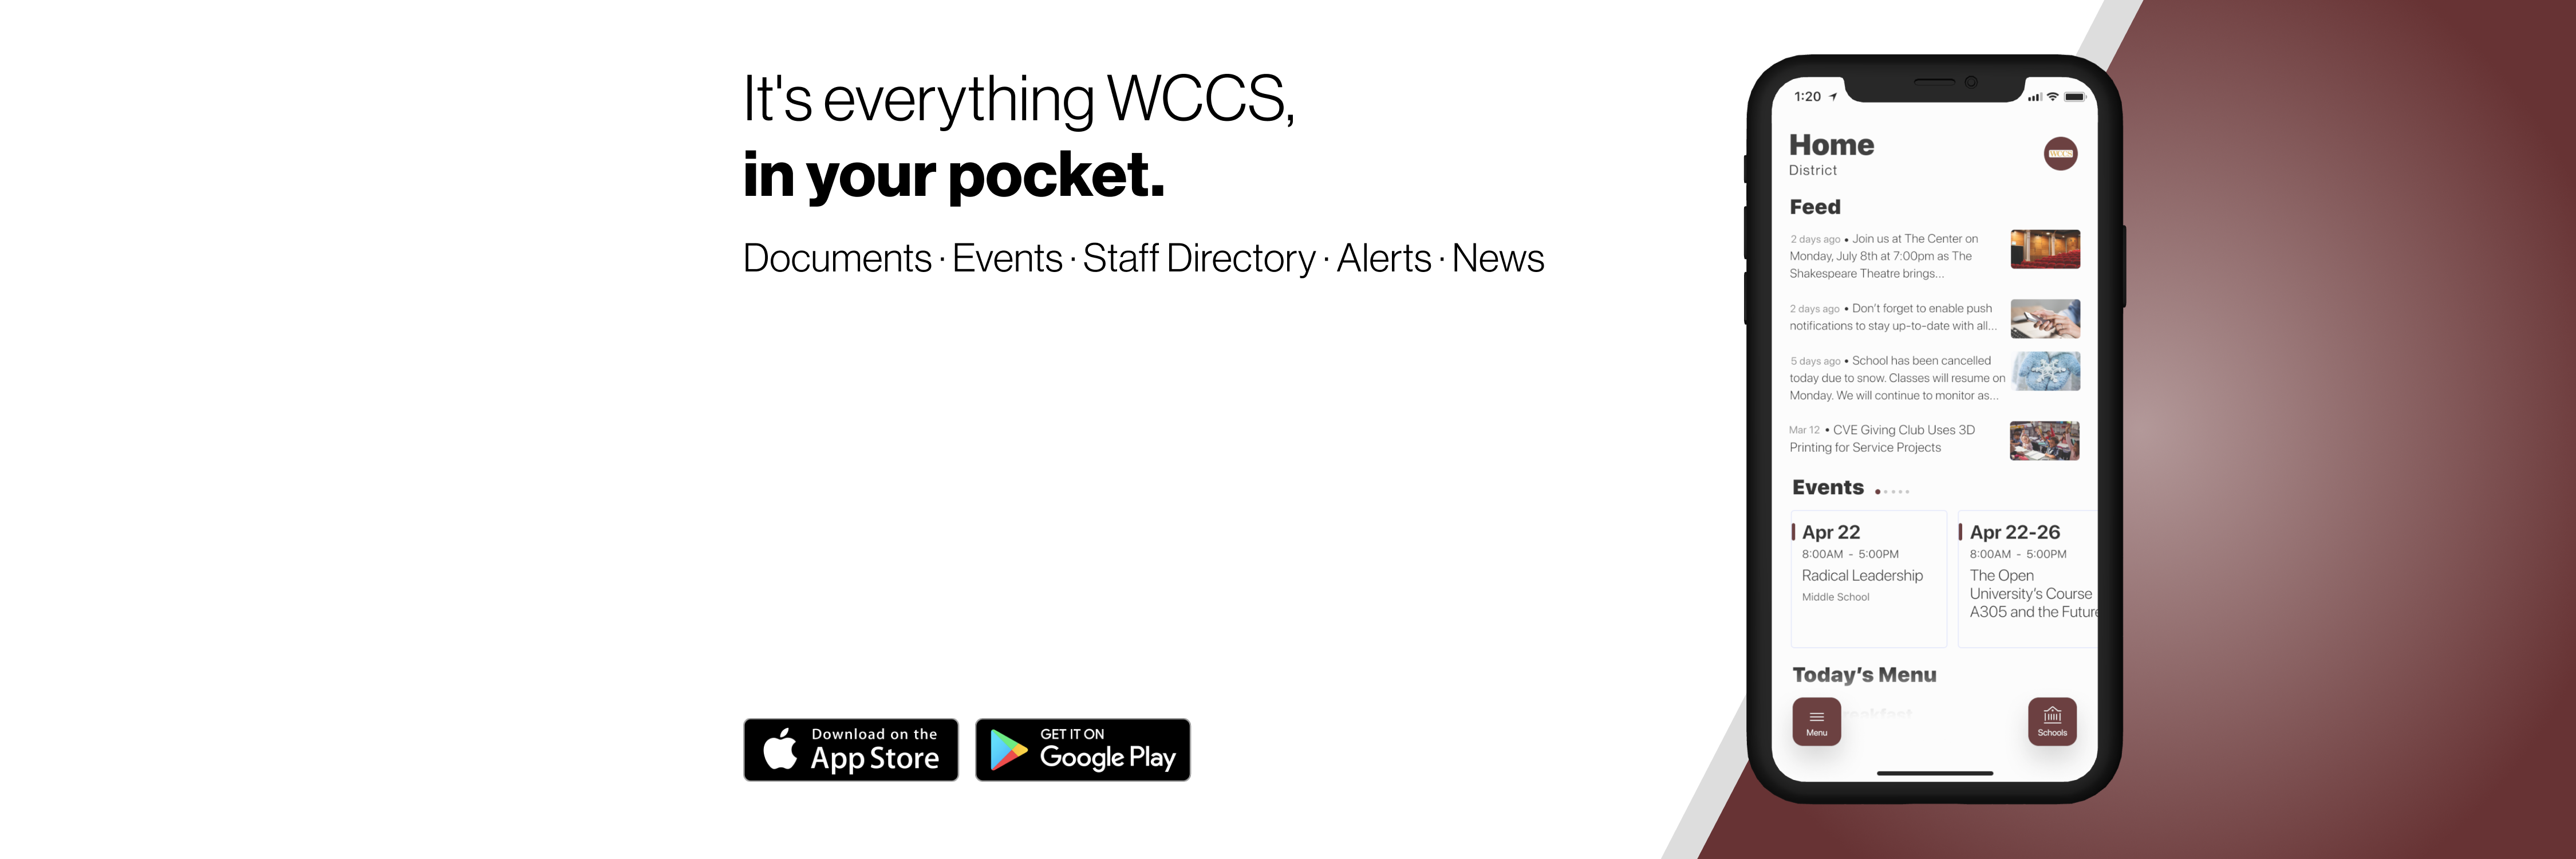 Get the WCCS mobile app